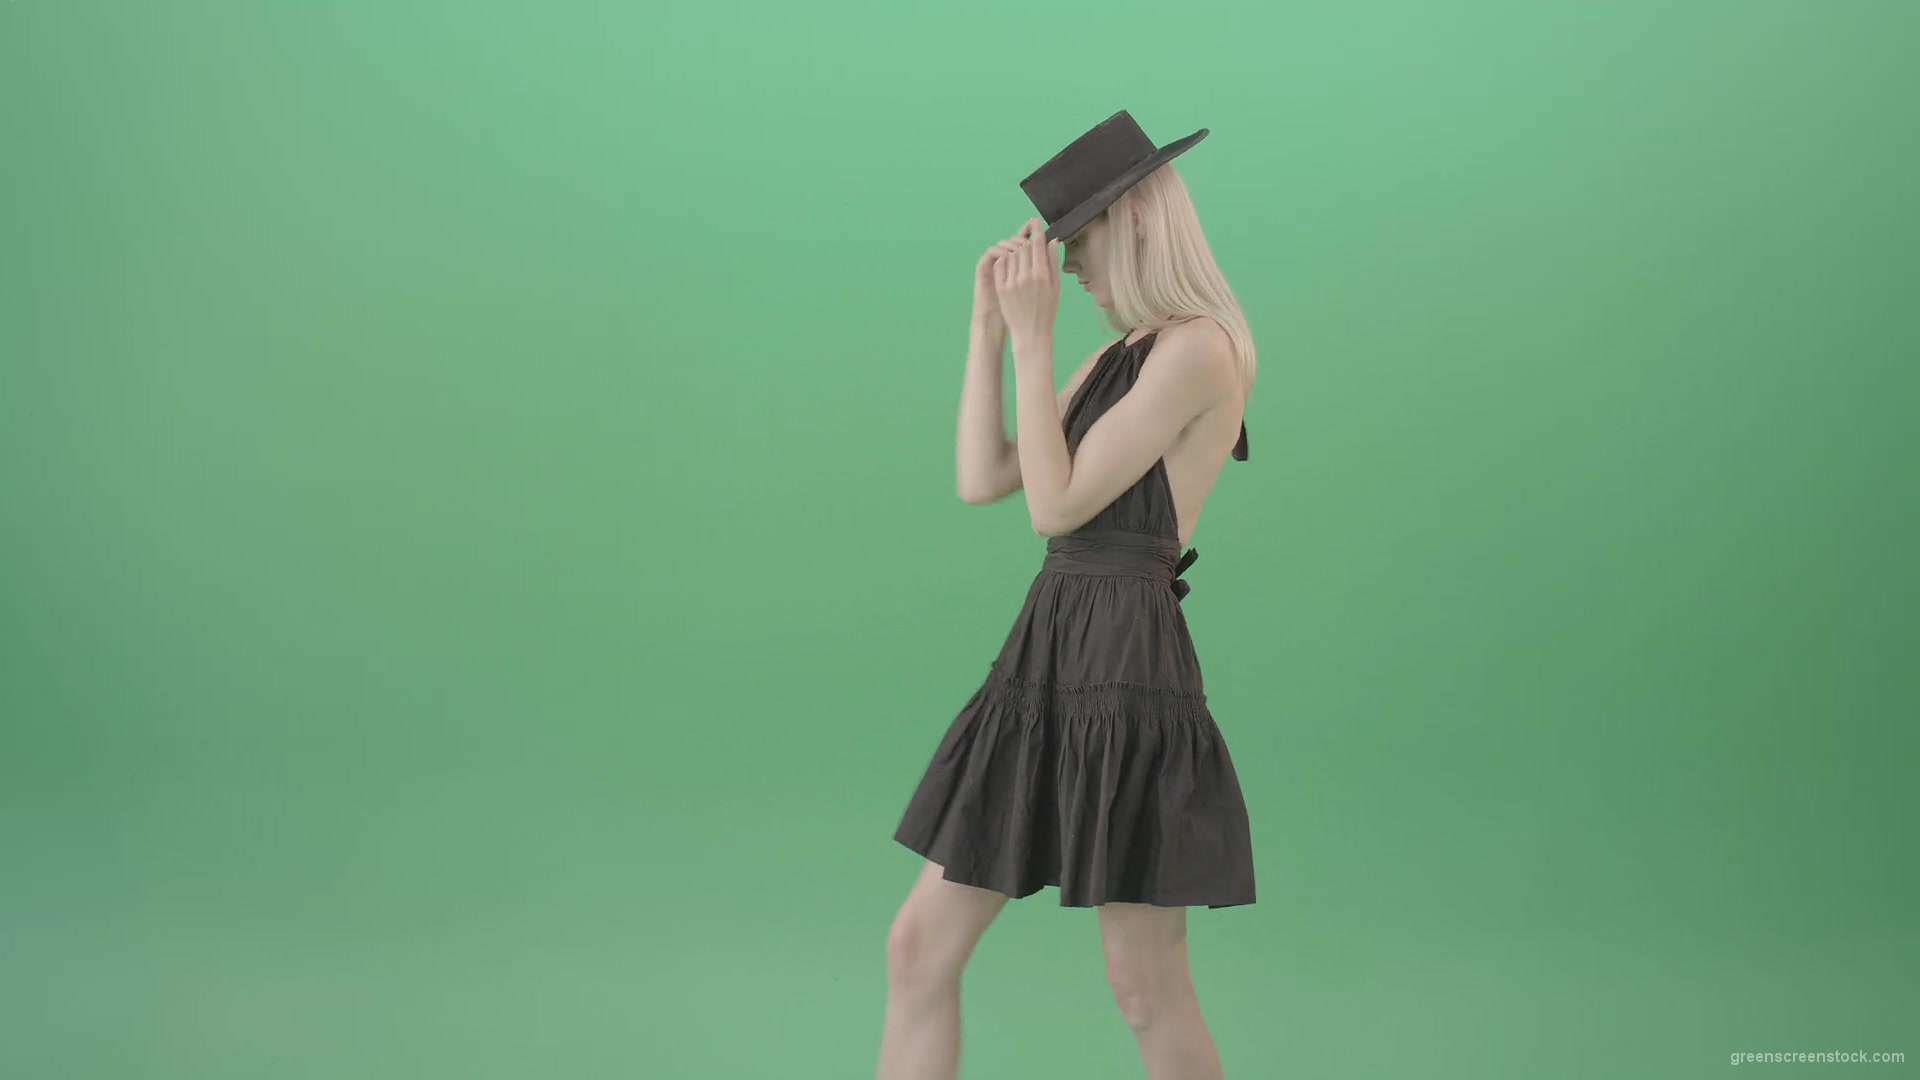 Video-Art-Fashion-Dance-by-Girl-in-black-outlet-and-dark-hat-on-green-screen-Video-Footage-1920_002 Green Screen Stock